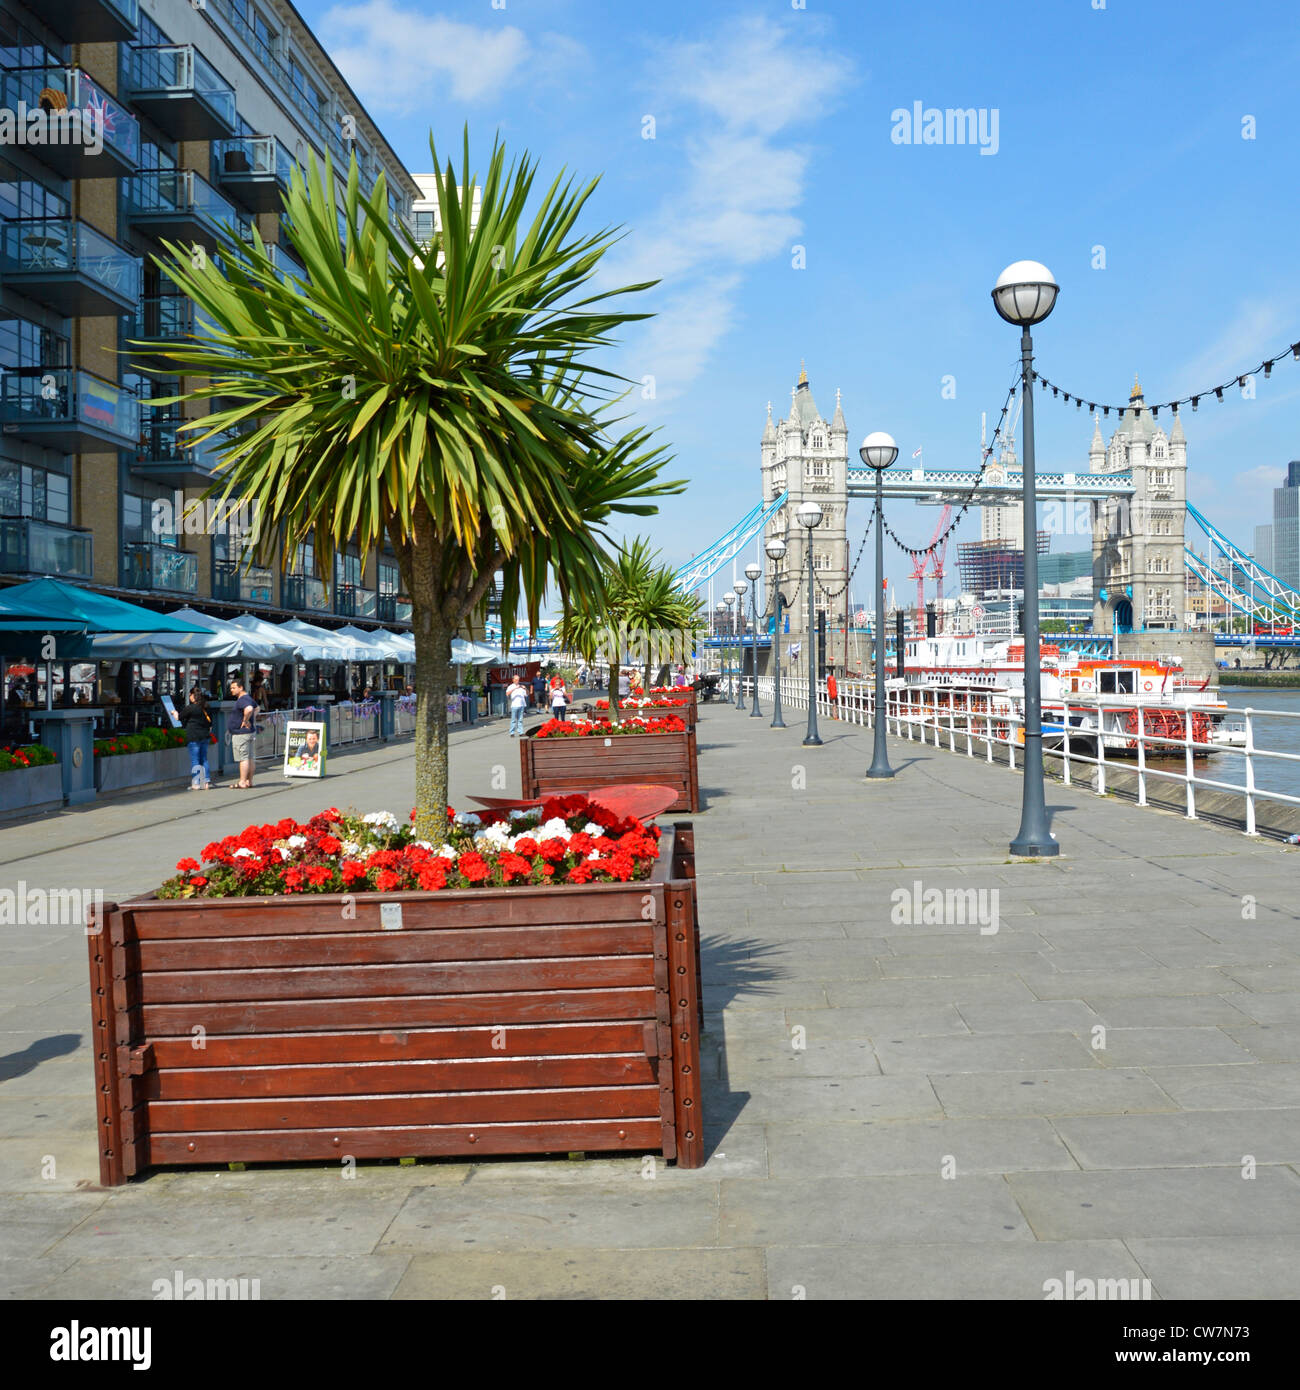 Thames Path Butlers Wharf on River Thames views of Tower Bridge  riverside apartments restaurants canopies & flower cordyline tree planters London UK Stock Photo